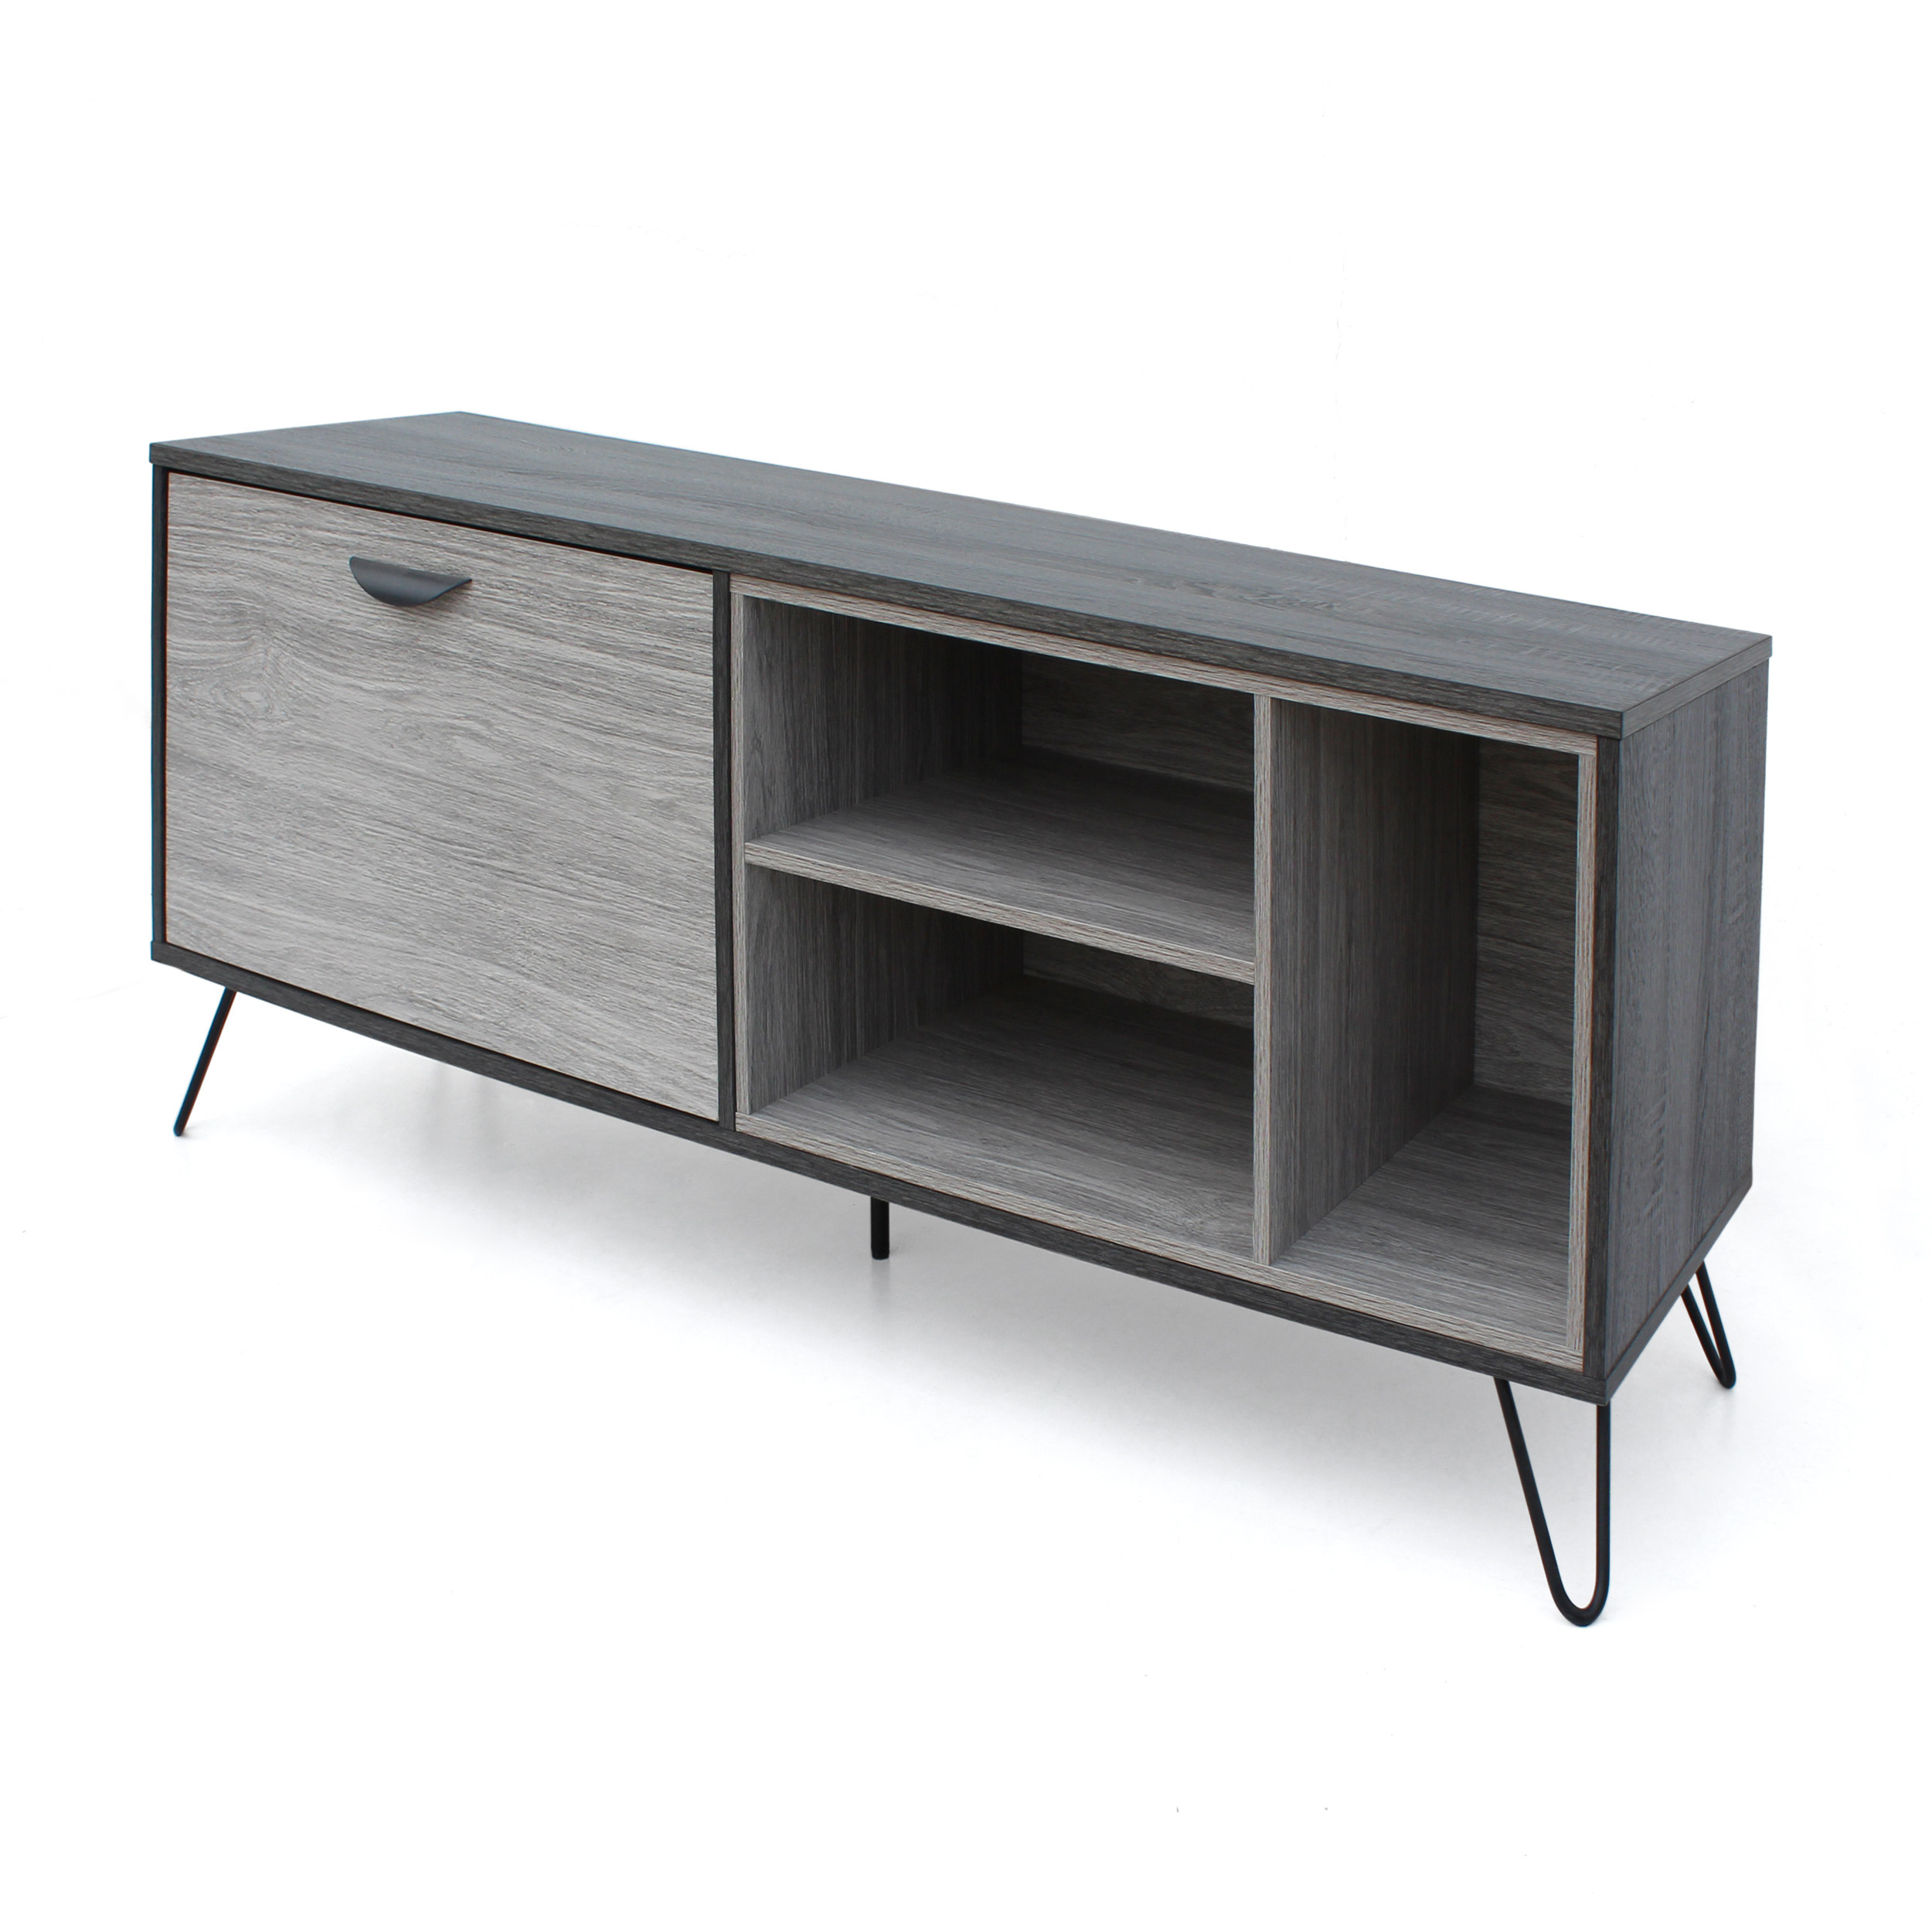 Vivian Mid Century Modern Two Toned Gray Oak Finished Faux Wood TV Stand